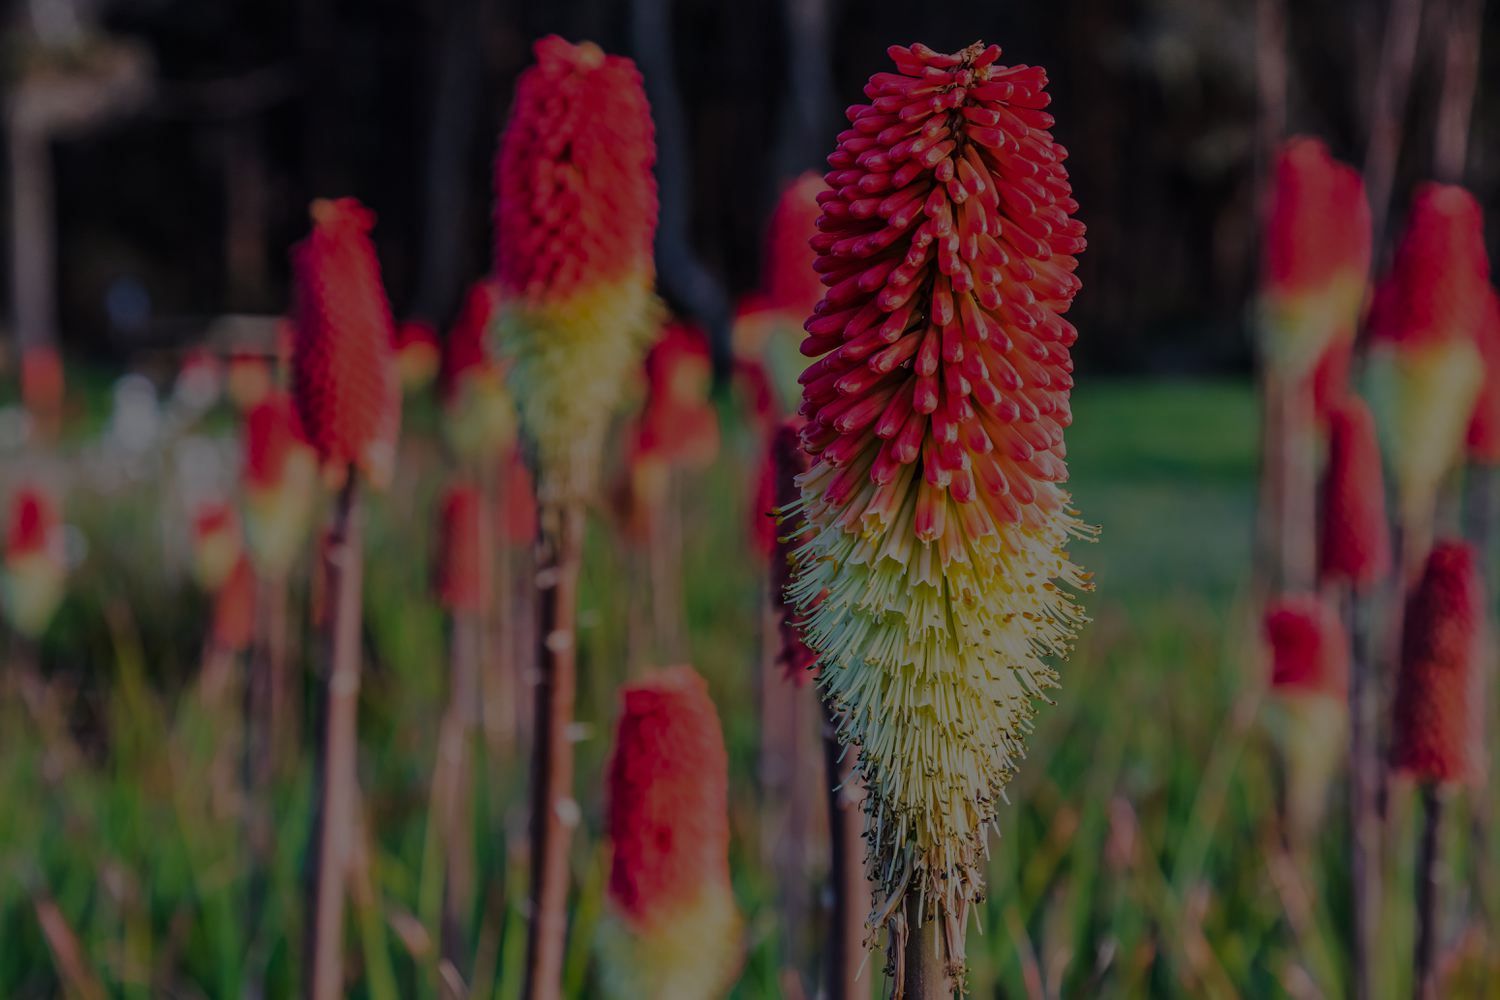 How To Grow And Care For Red Hot Poker Plant